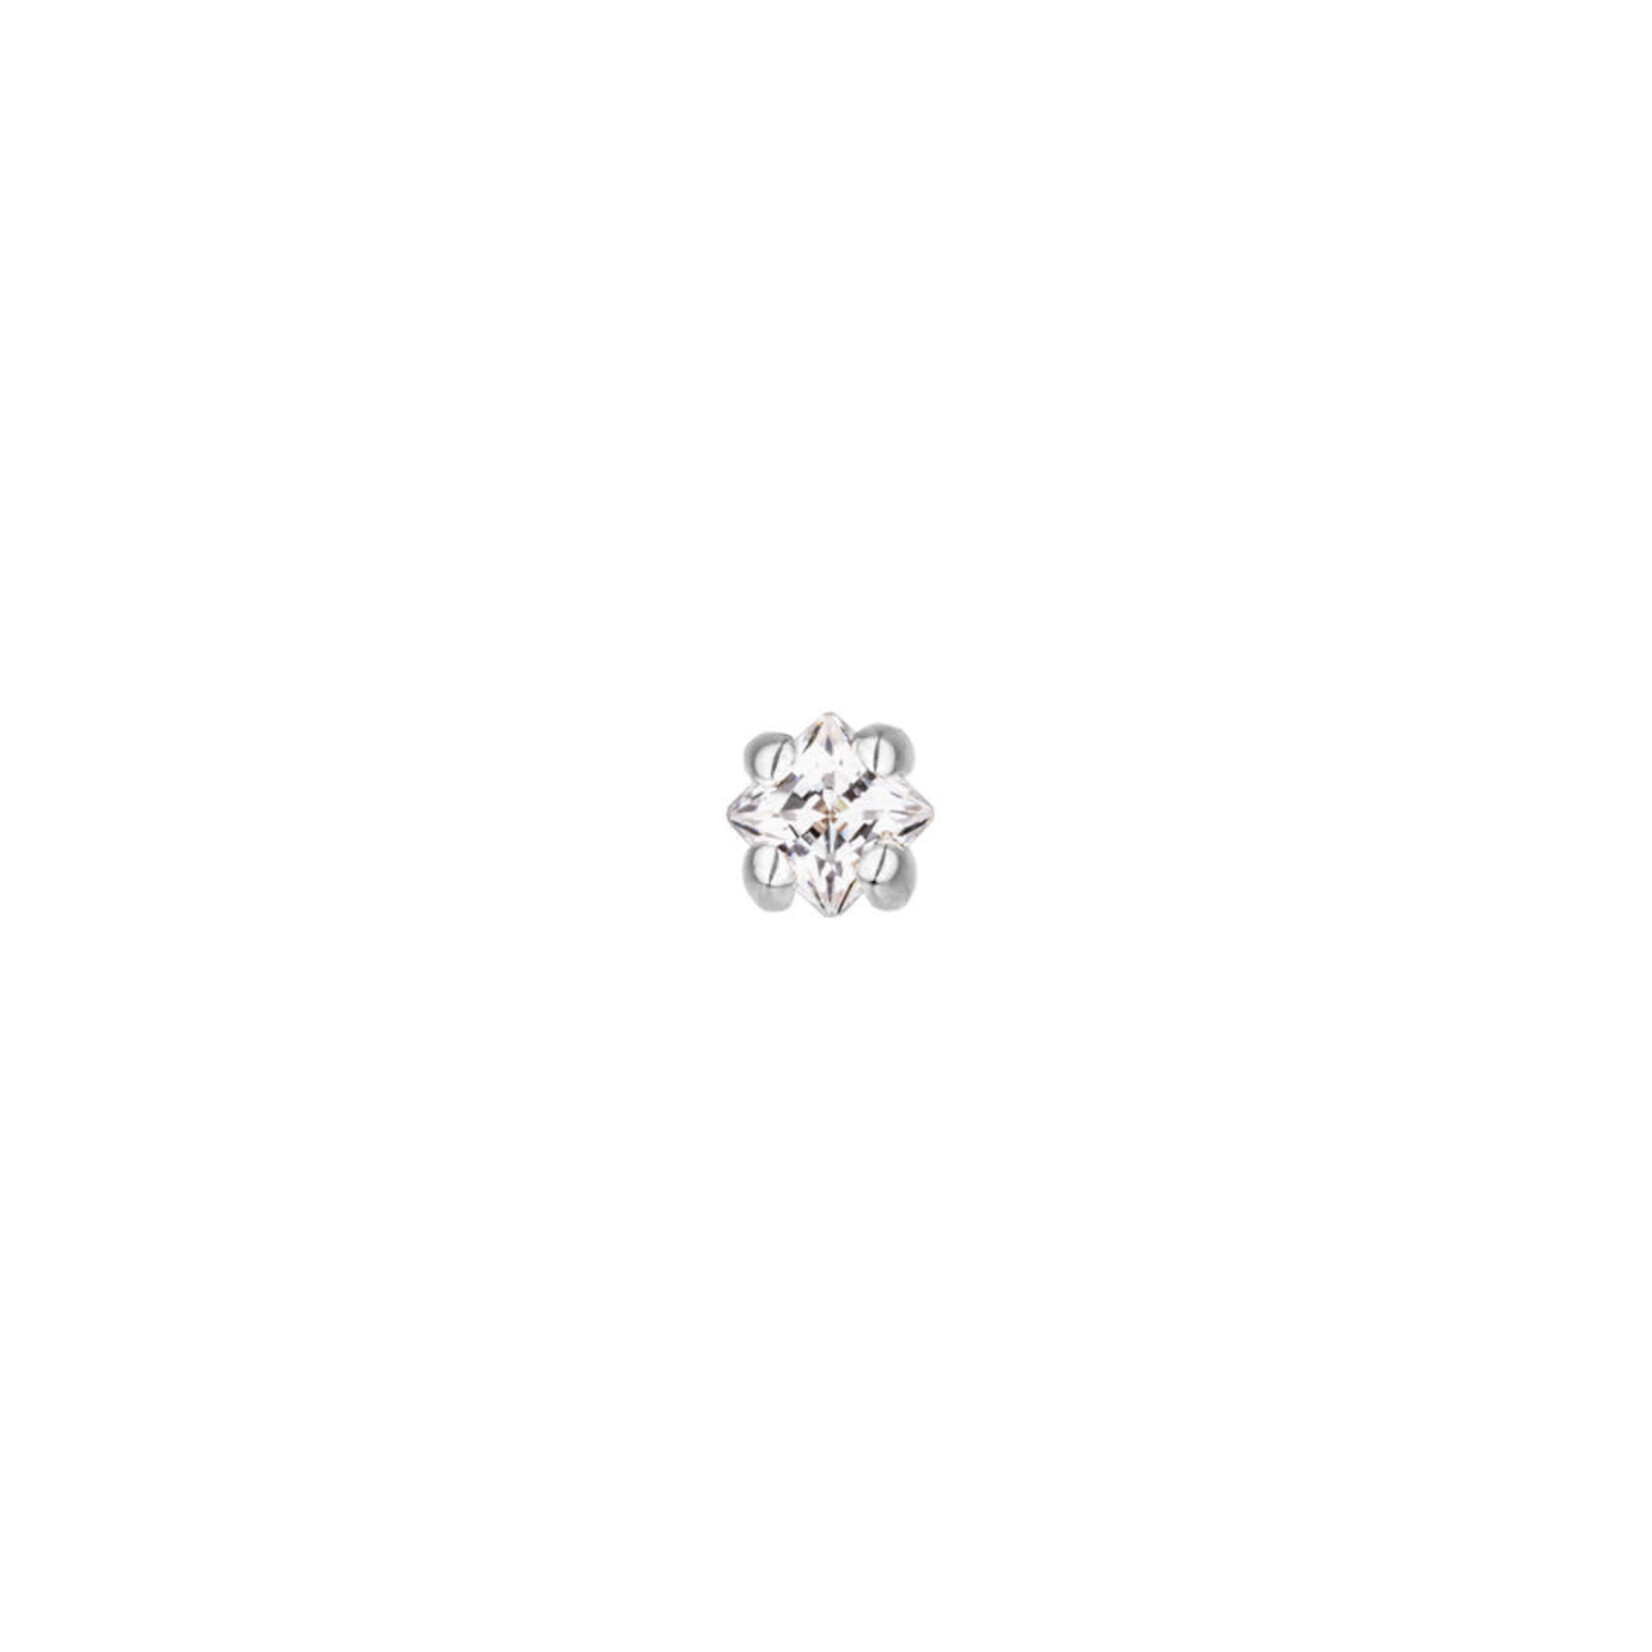 BVLA BVLA 4 prong princess setting threaded end with CZ